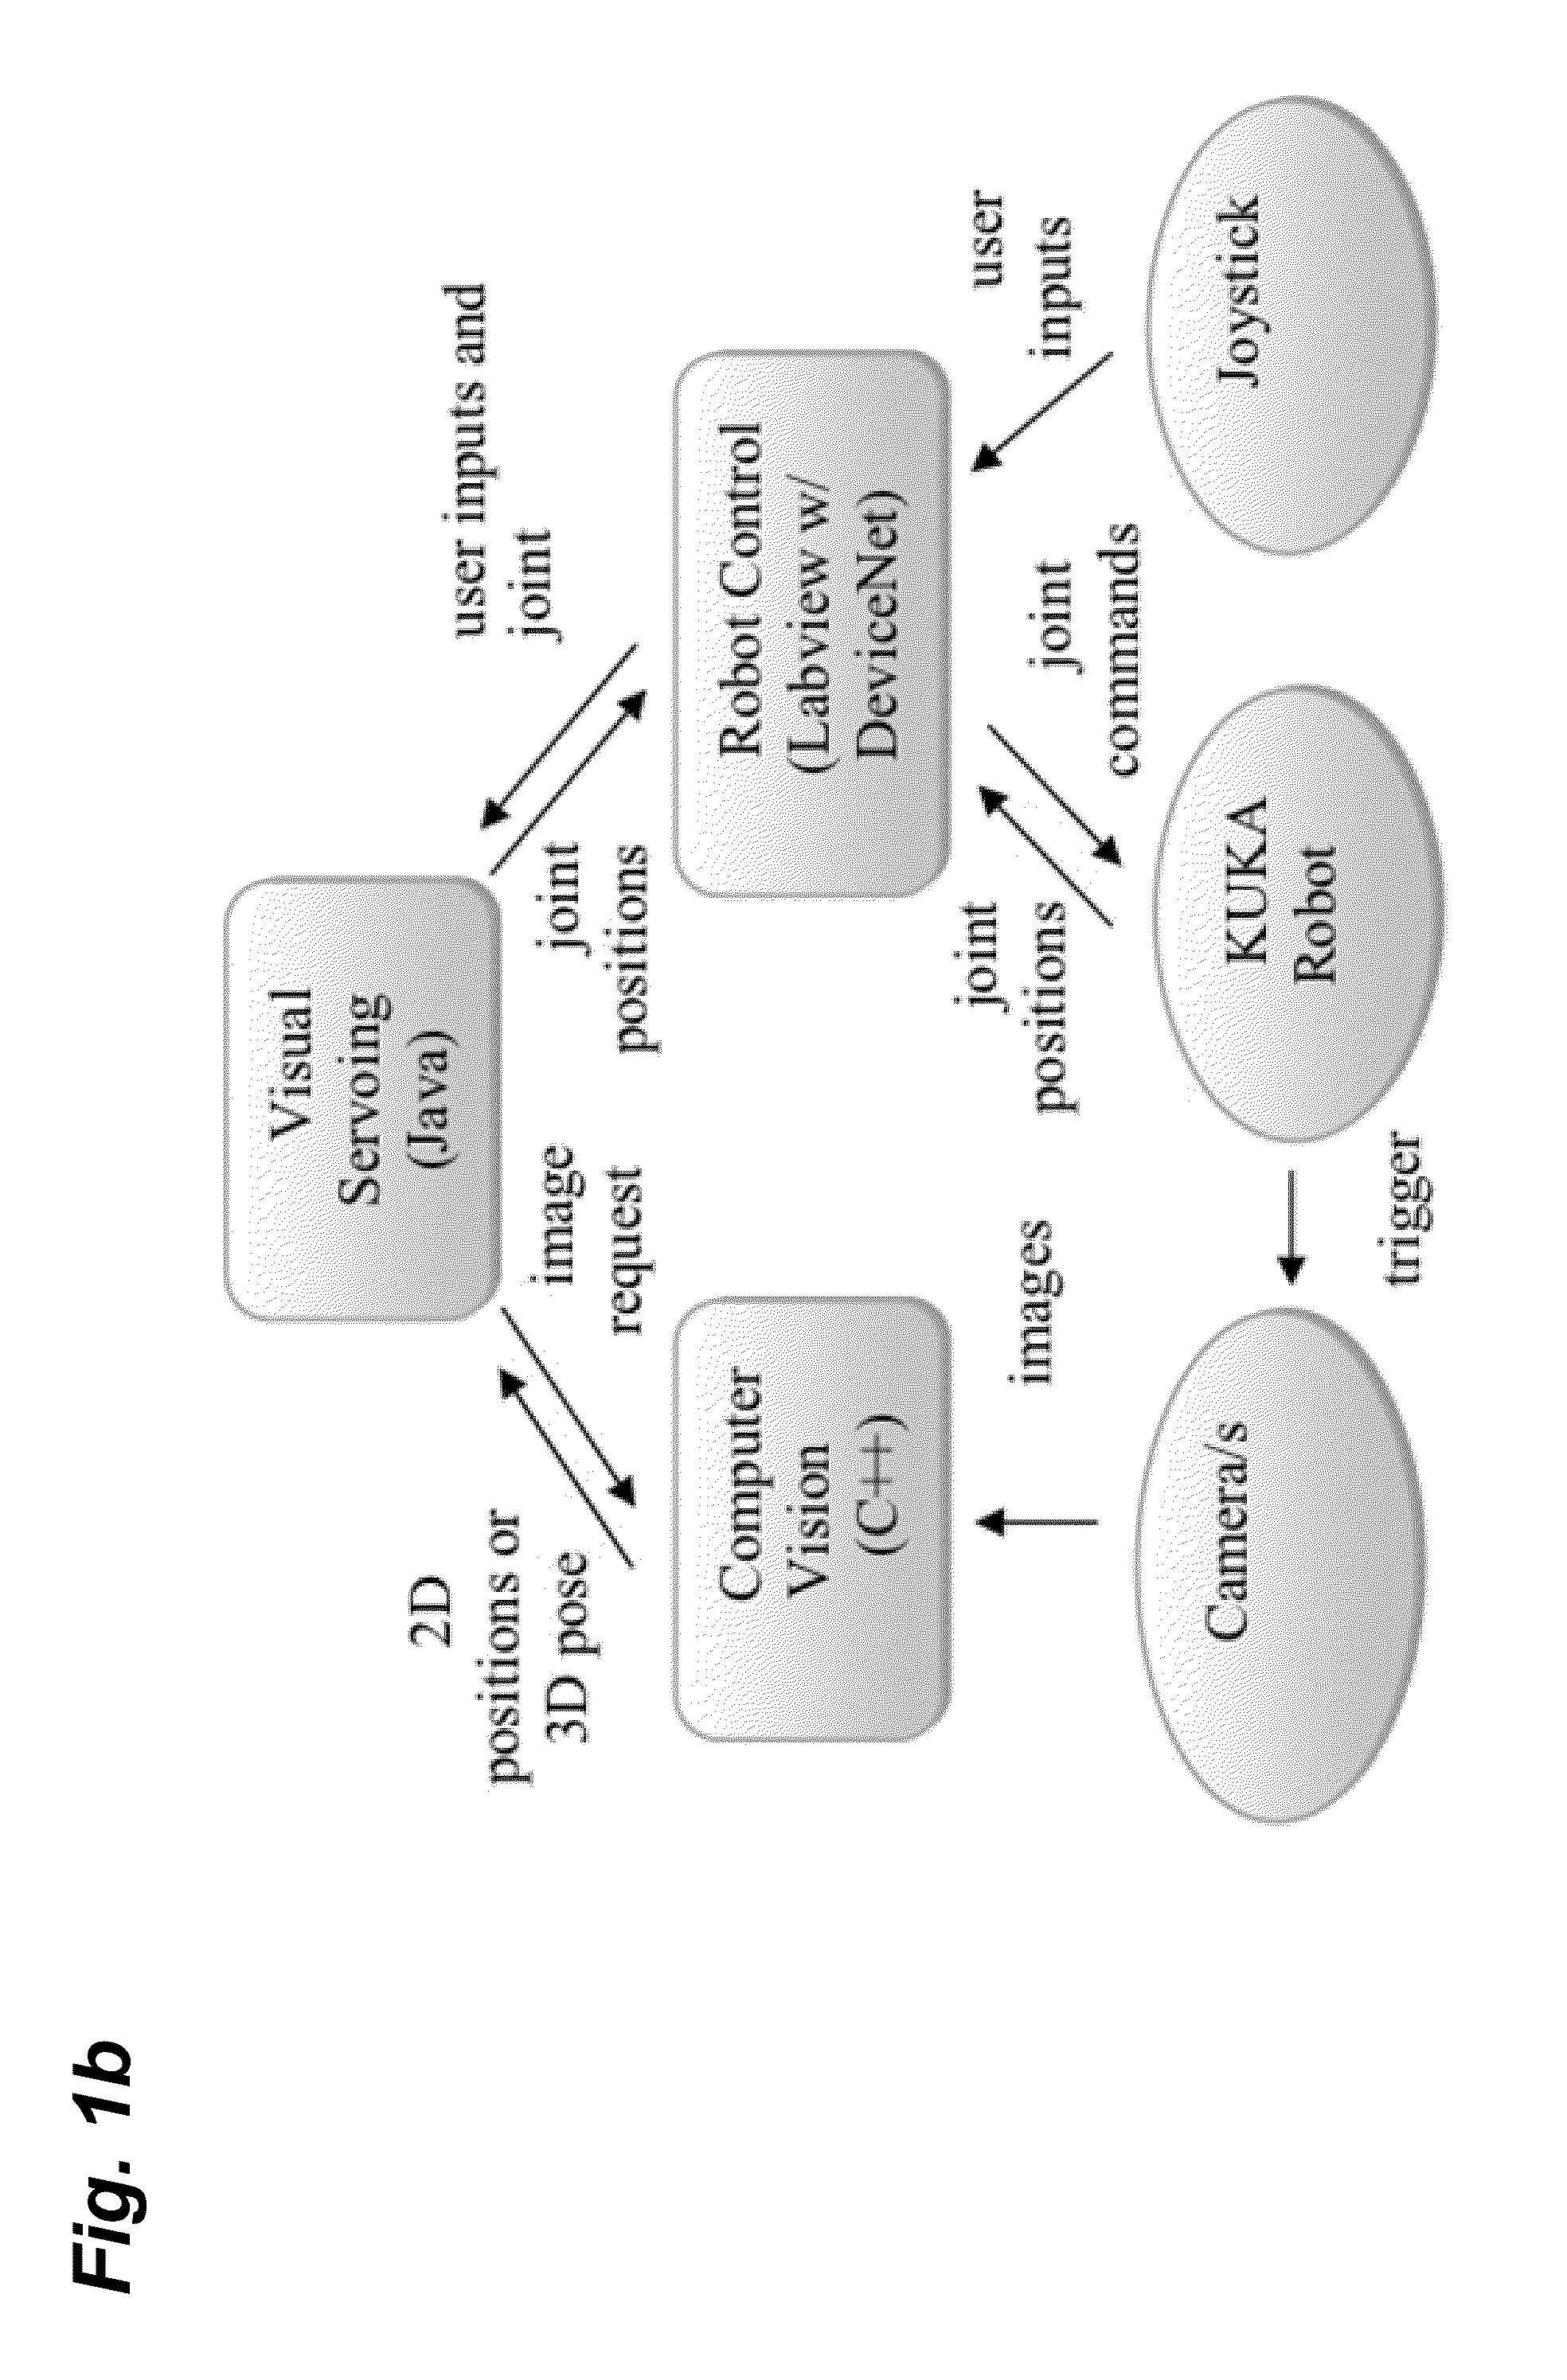 Systems and methods for operating robots using visual servoing